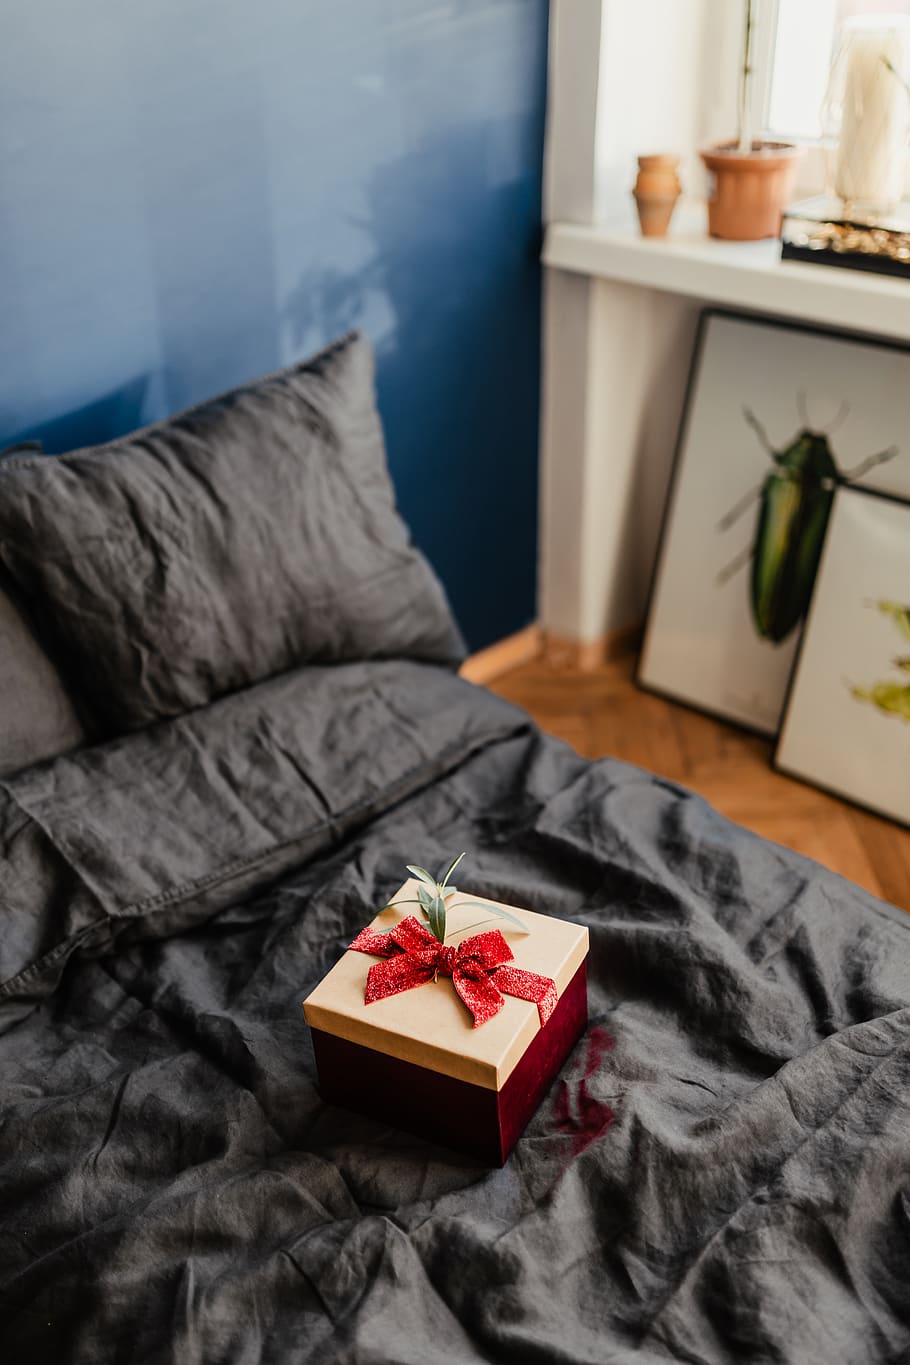 christmas gifts, presents, xmas, linen, bed, red, black, bedding, december, winter